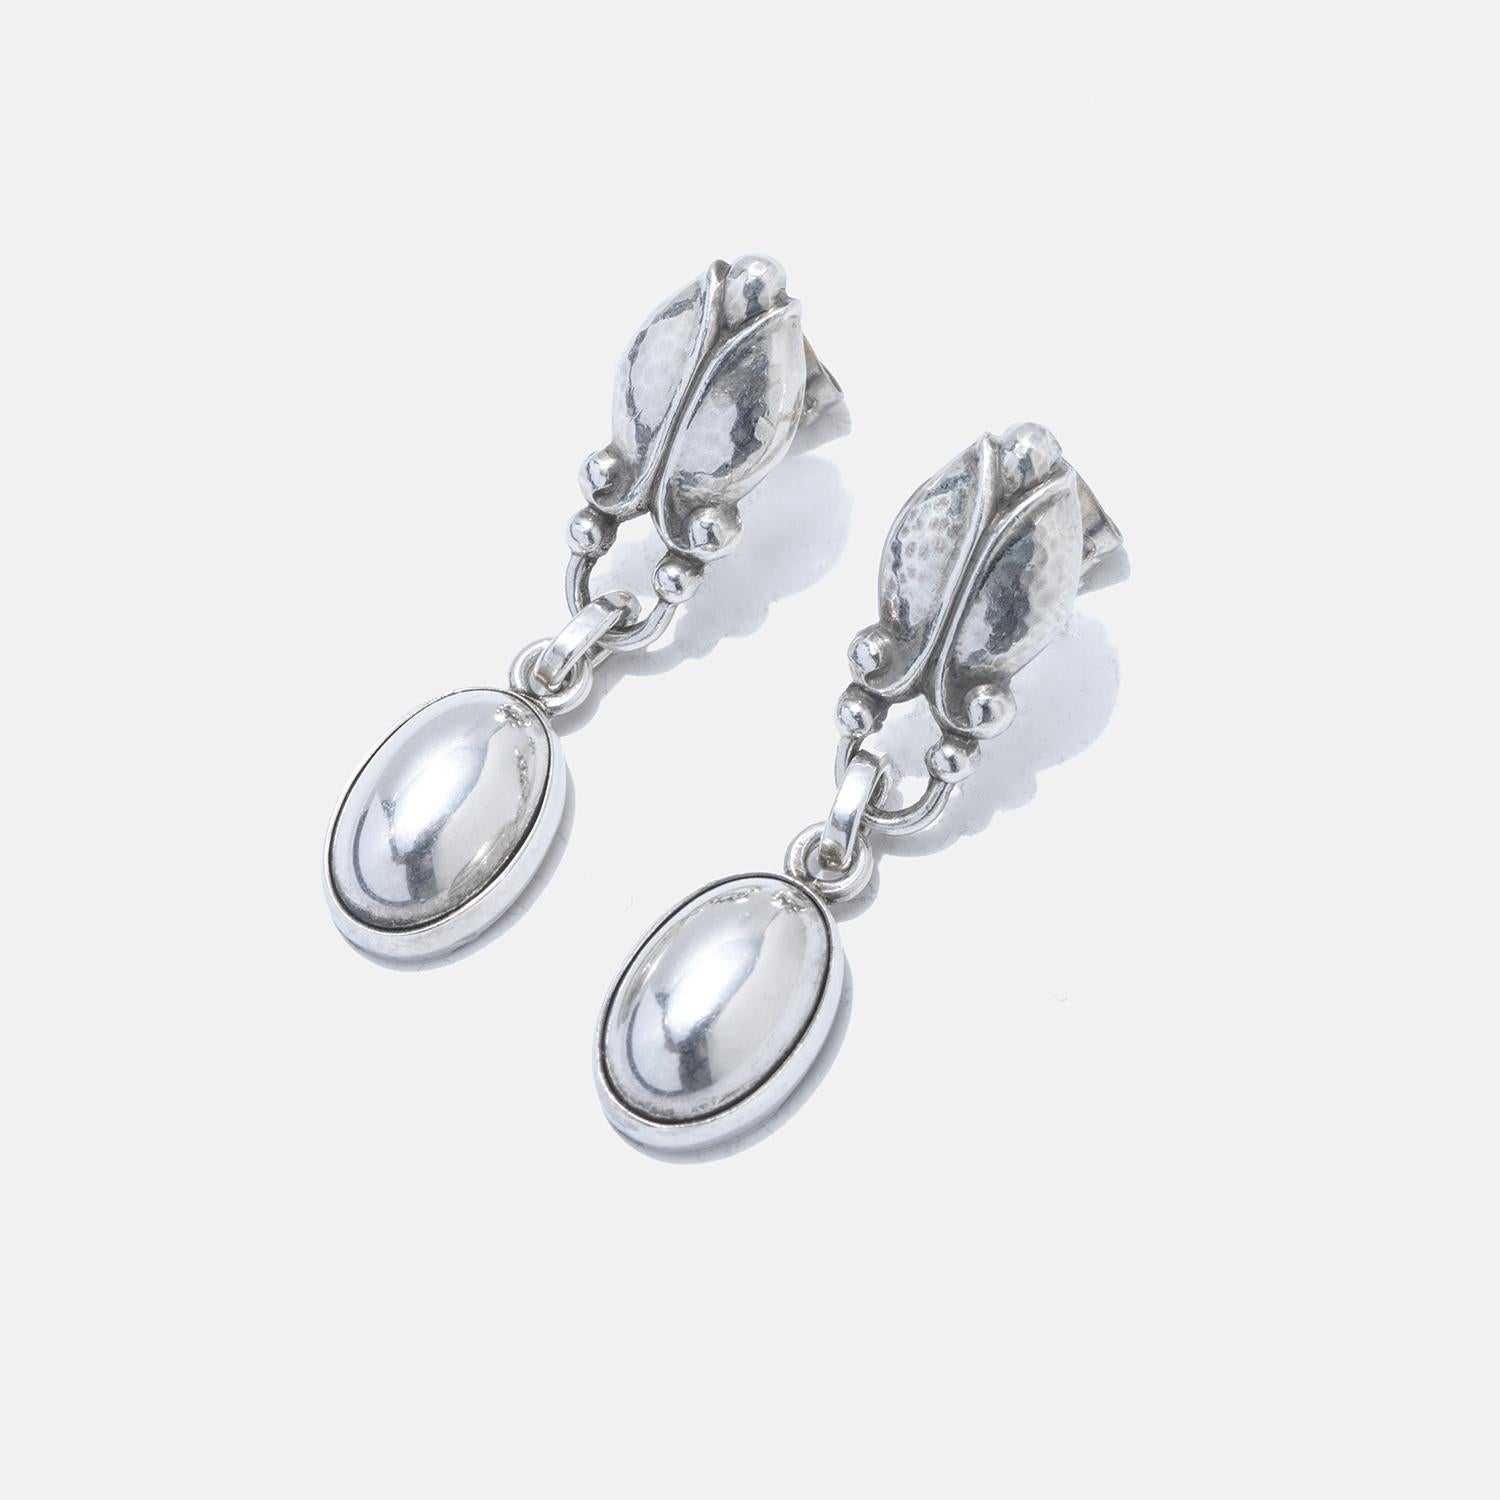 Silver Dangling Earrings by Georg Jensen In Good Condition For Sale In Stockholm, SE